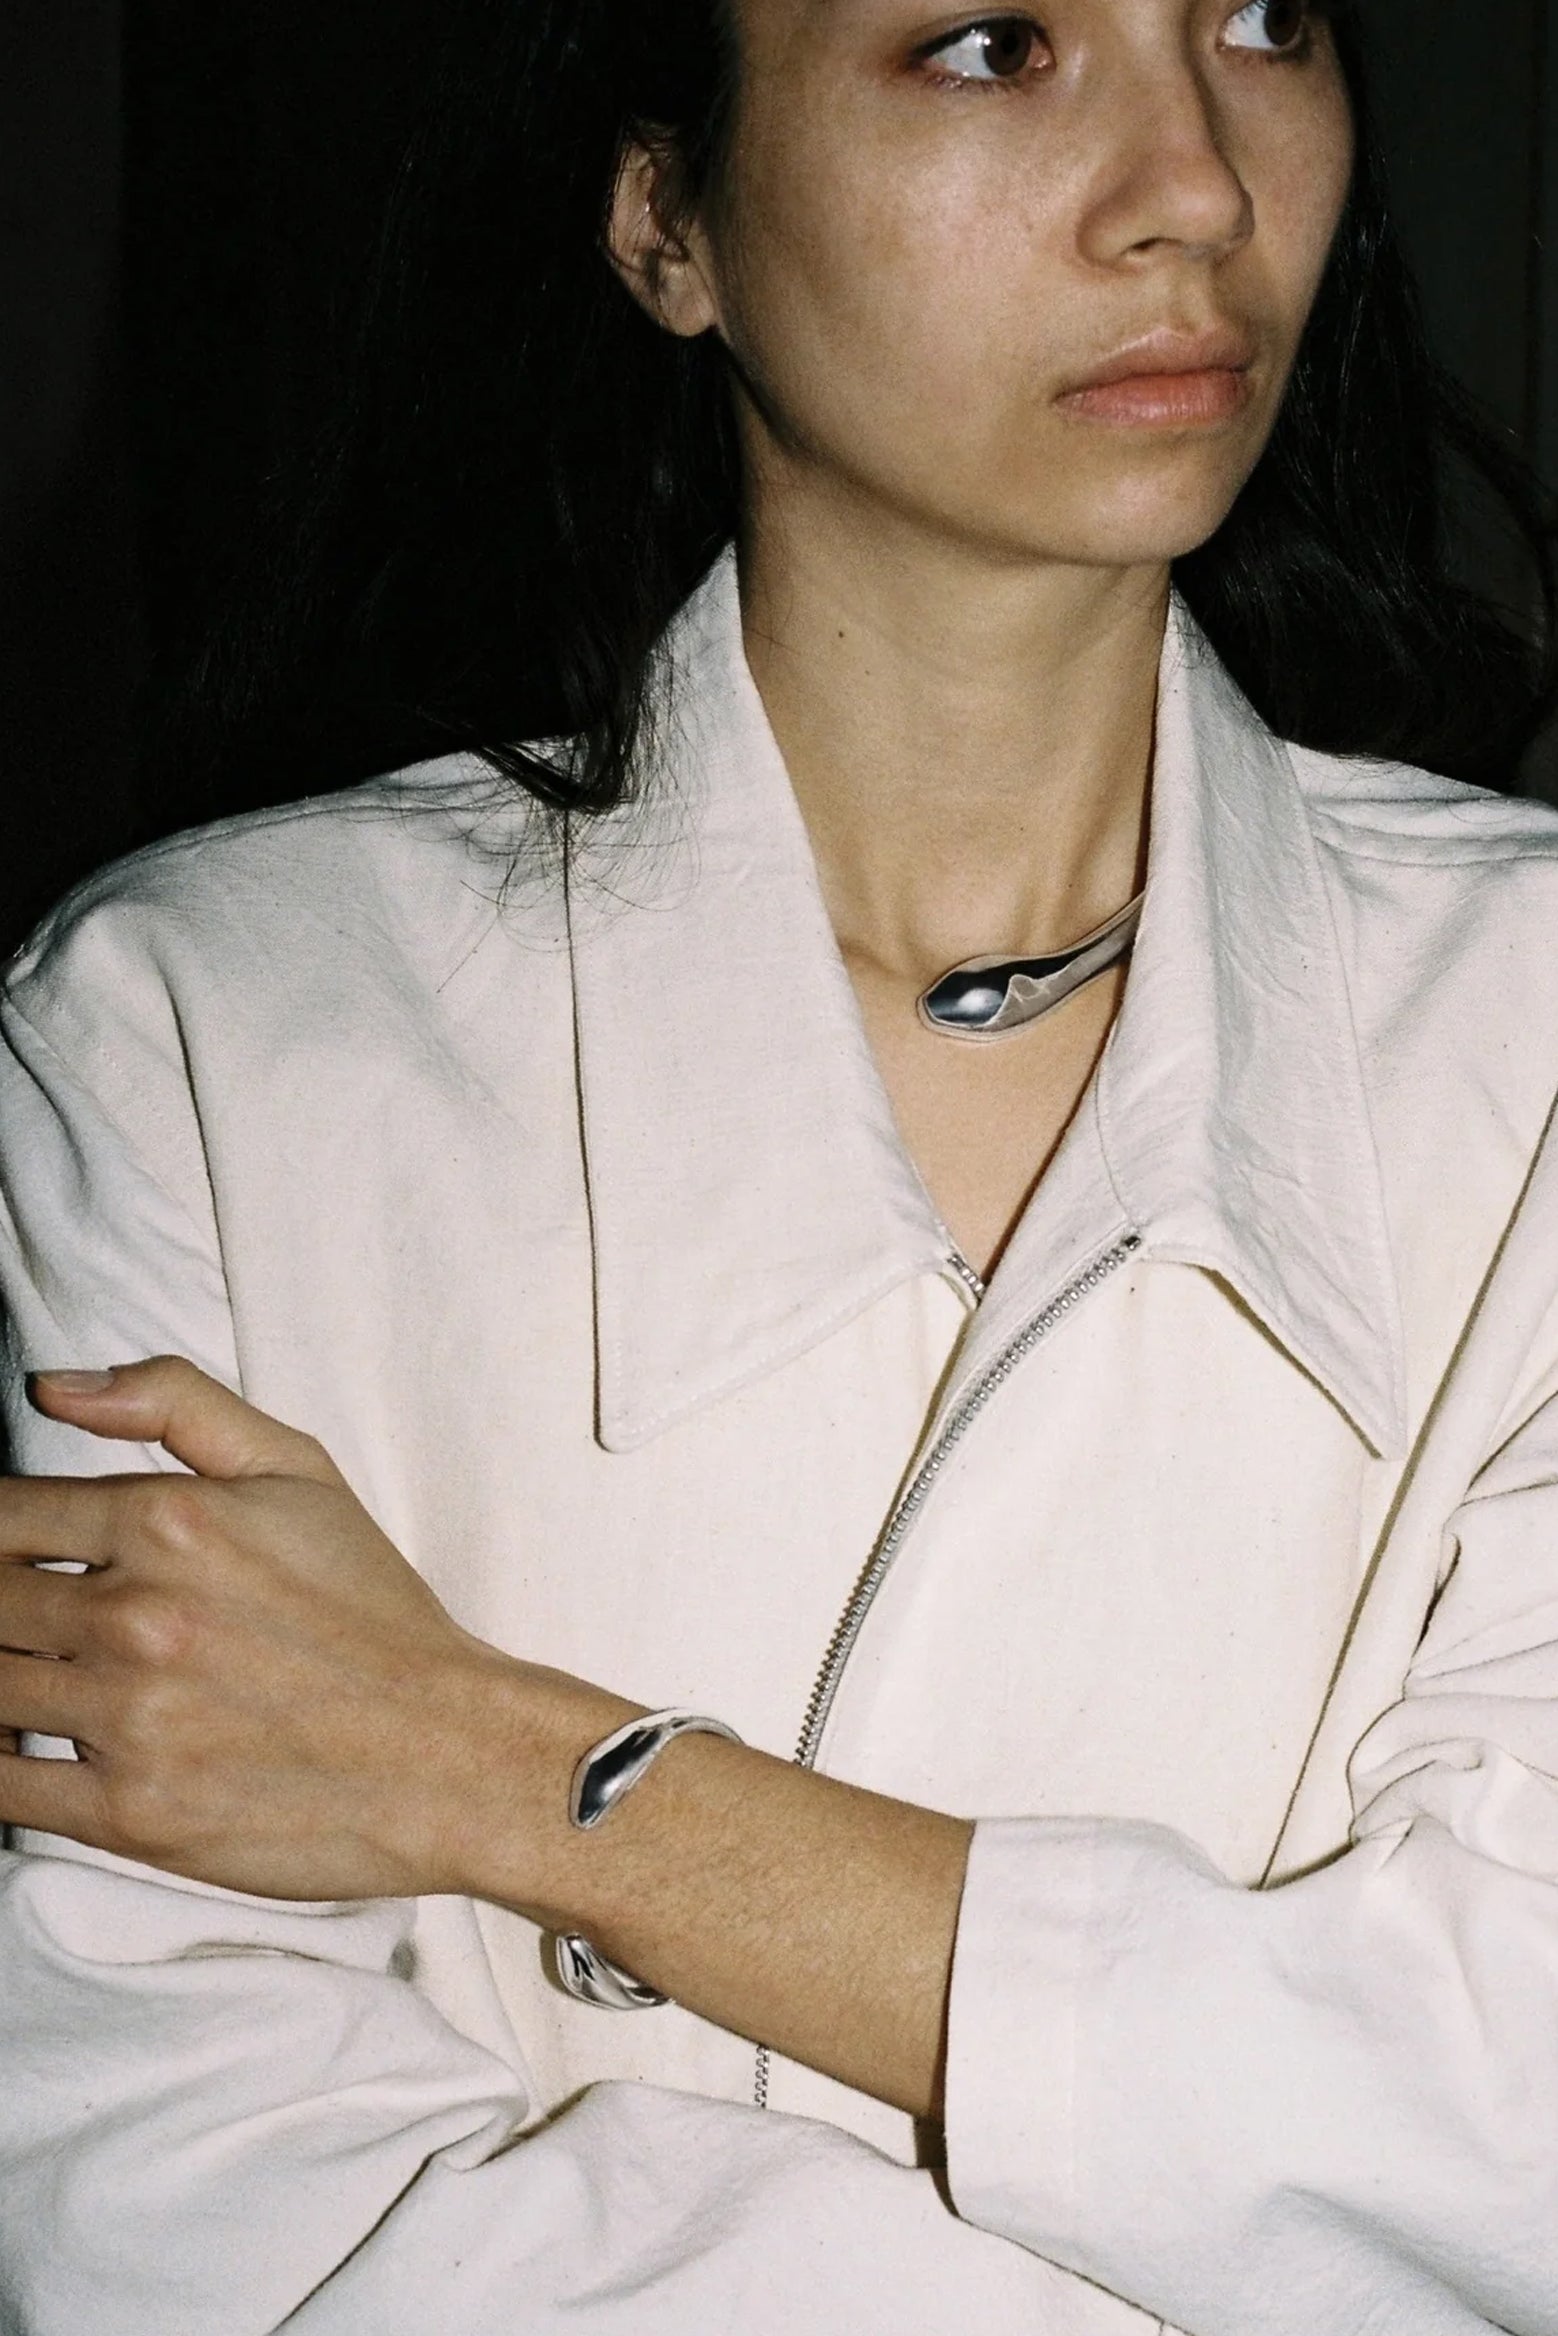 Annika inez Serpent Cuff Bracelet in Silver available at The New Trend Australia.